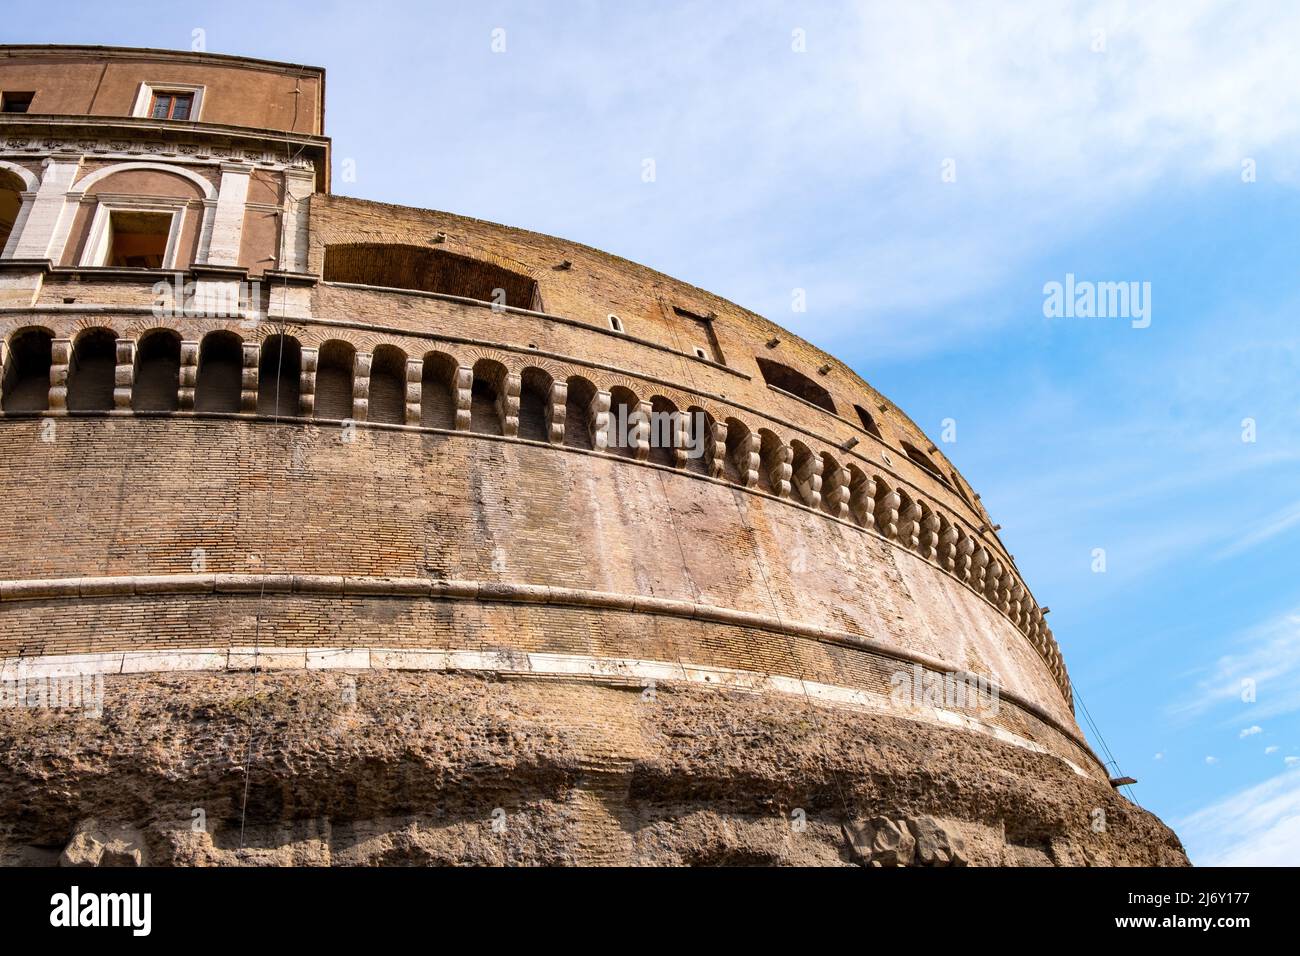 Rome, Italy - May 27, 2018: External walls of main rotunda of Castel Sant'Angelo mausoleum - Castle of the Holy Angel at Tiber river embankment in his Stock Photo